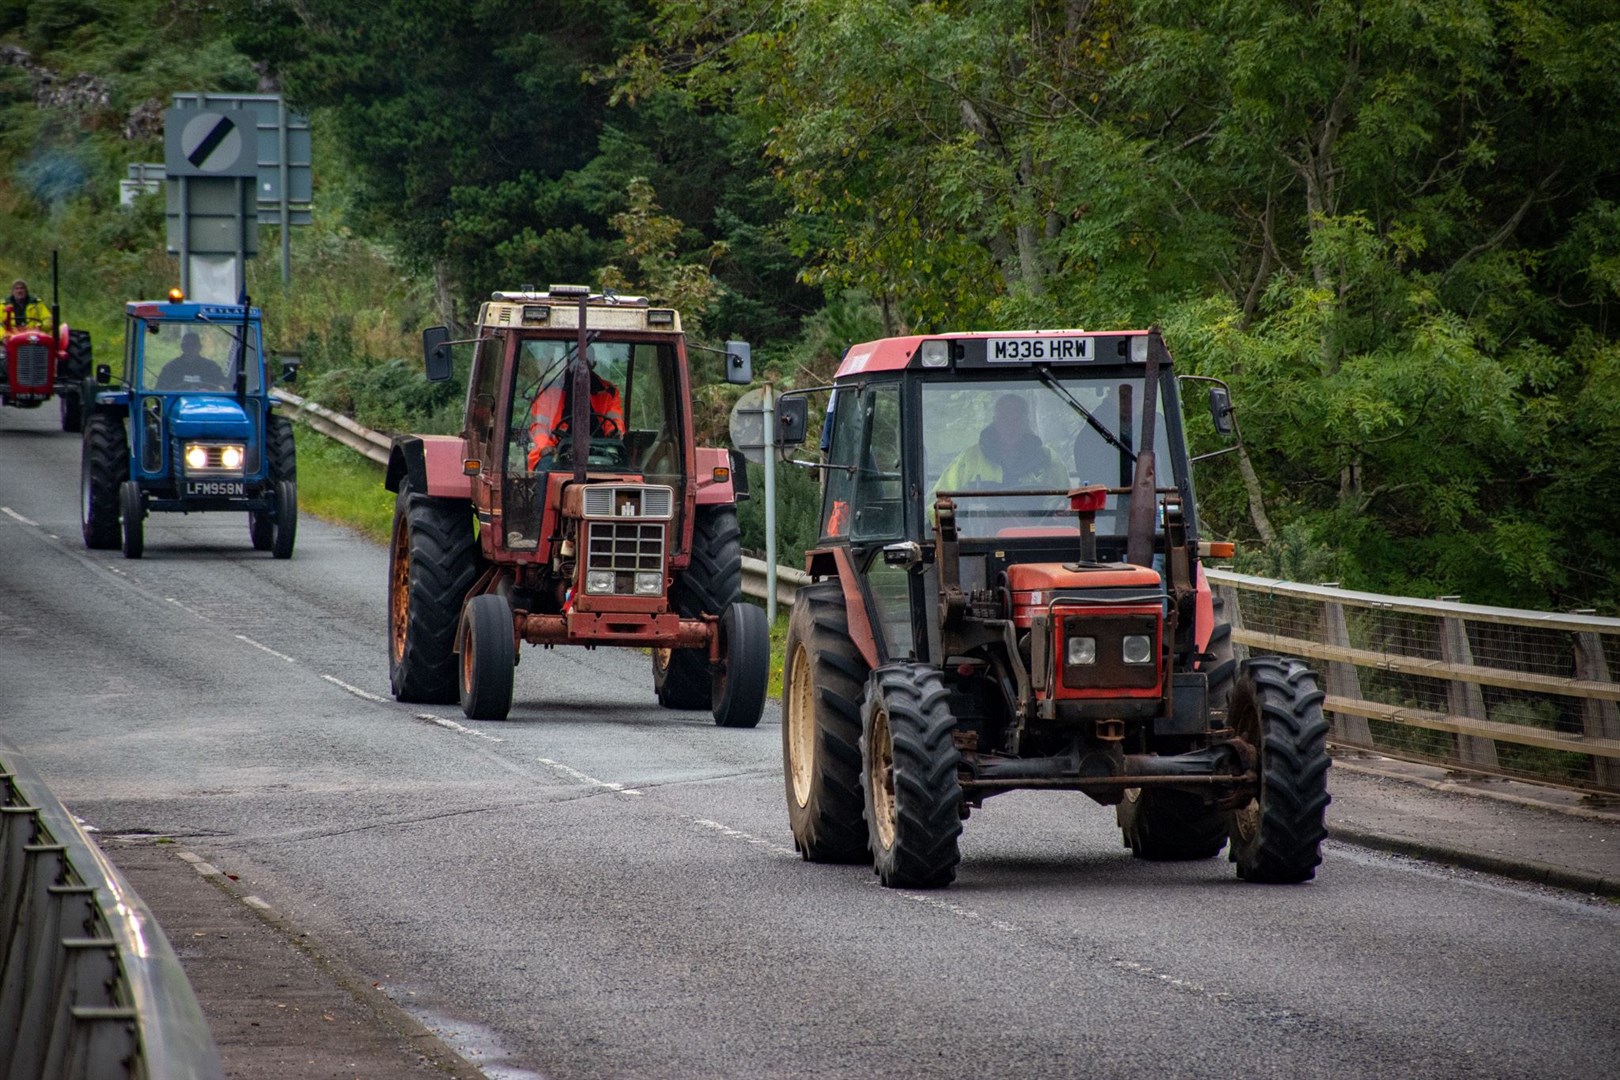 Ian Morrison and Joseph Mackay are in the front two tractors. Picture: Sean Mackay